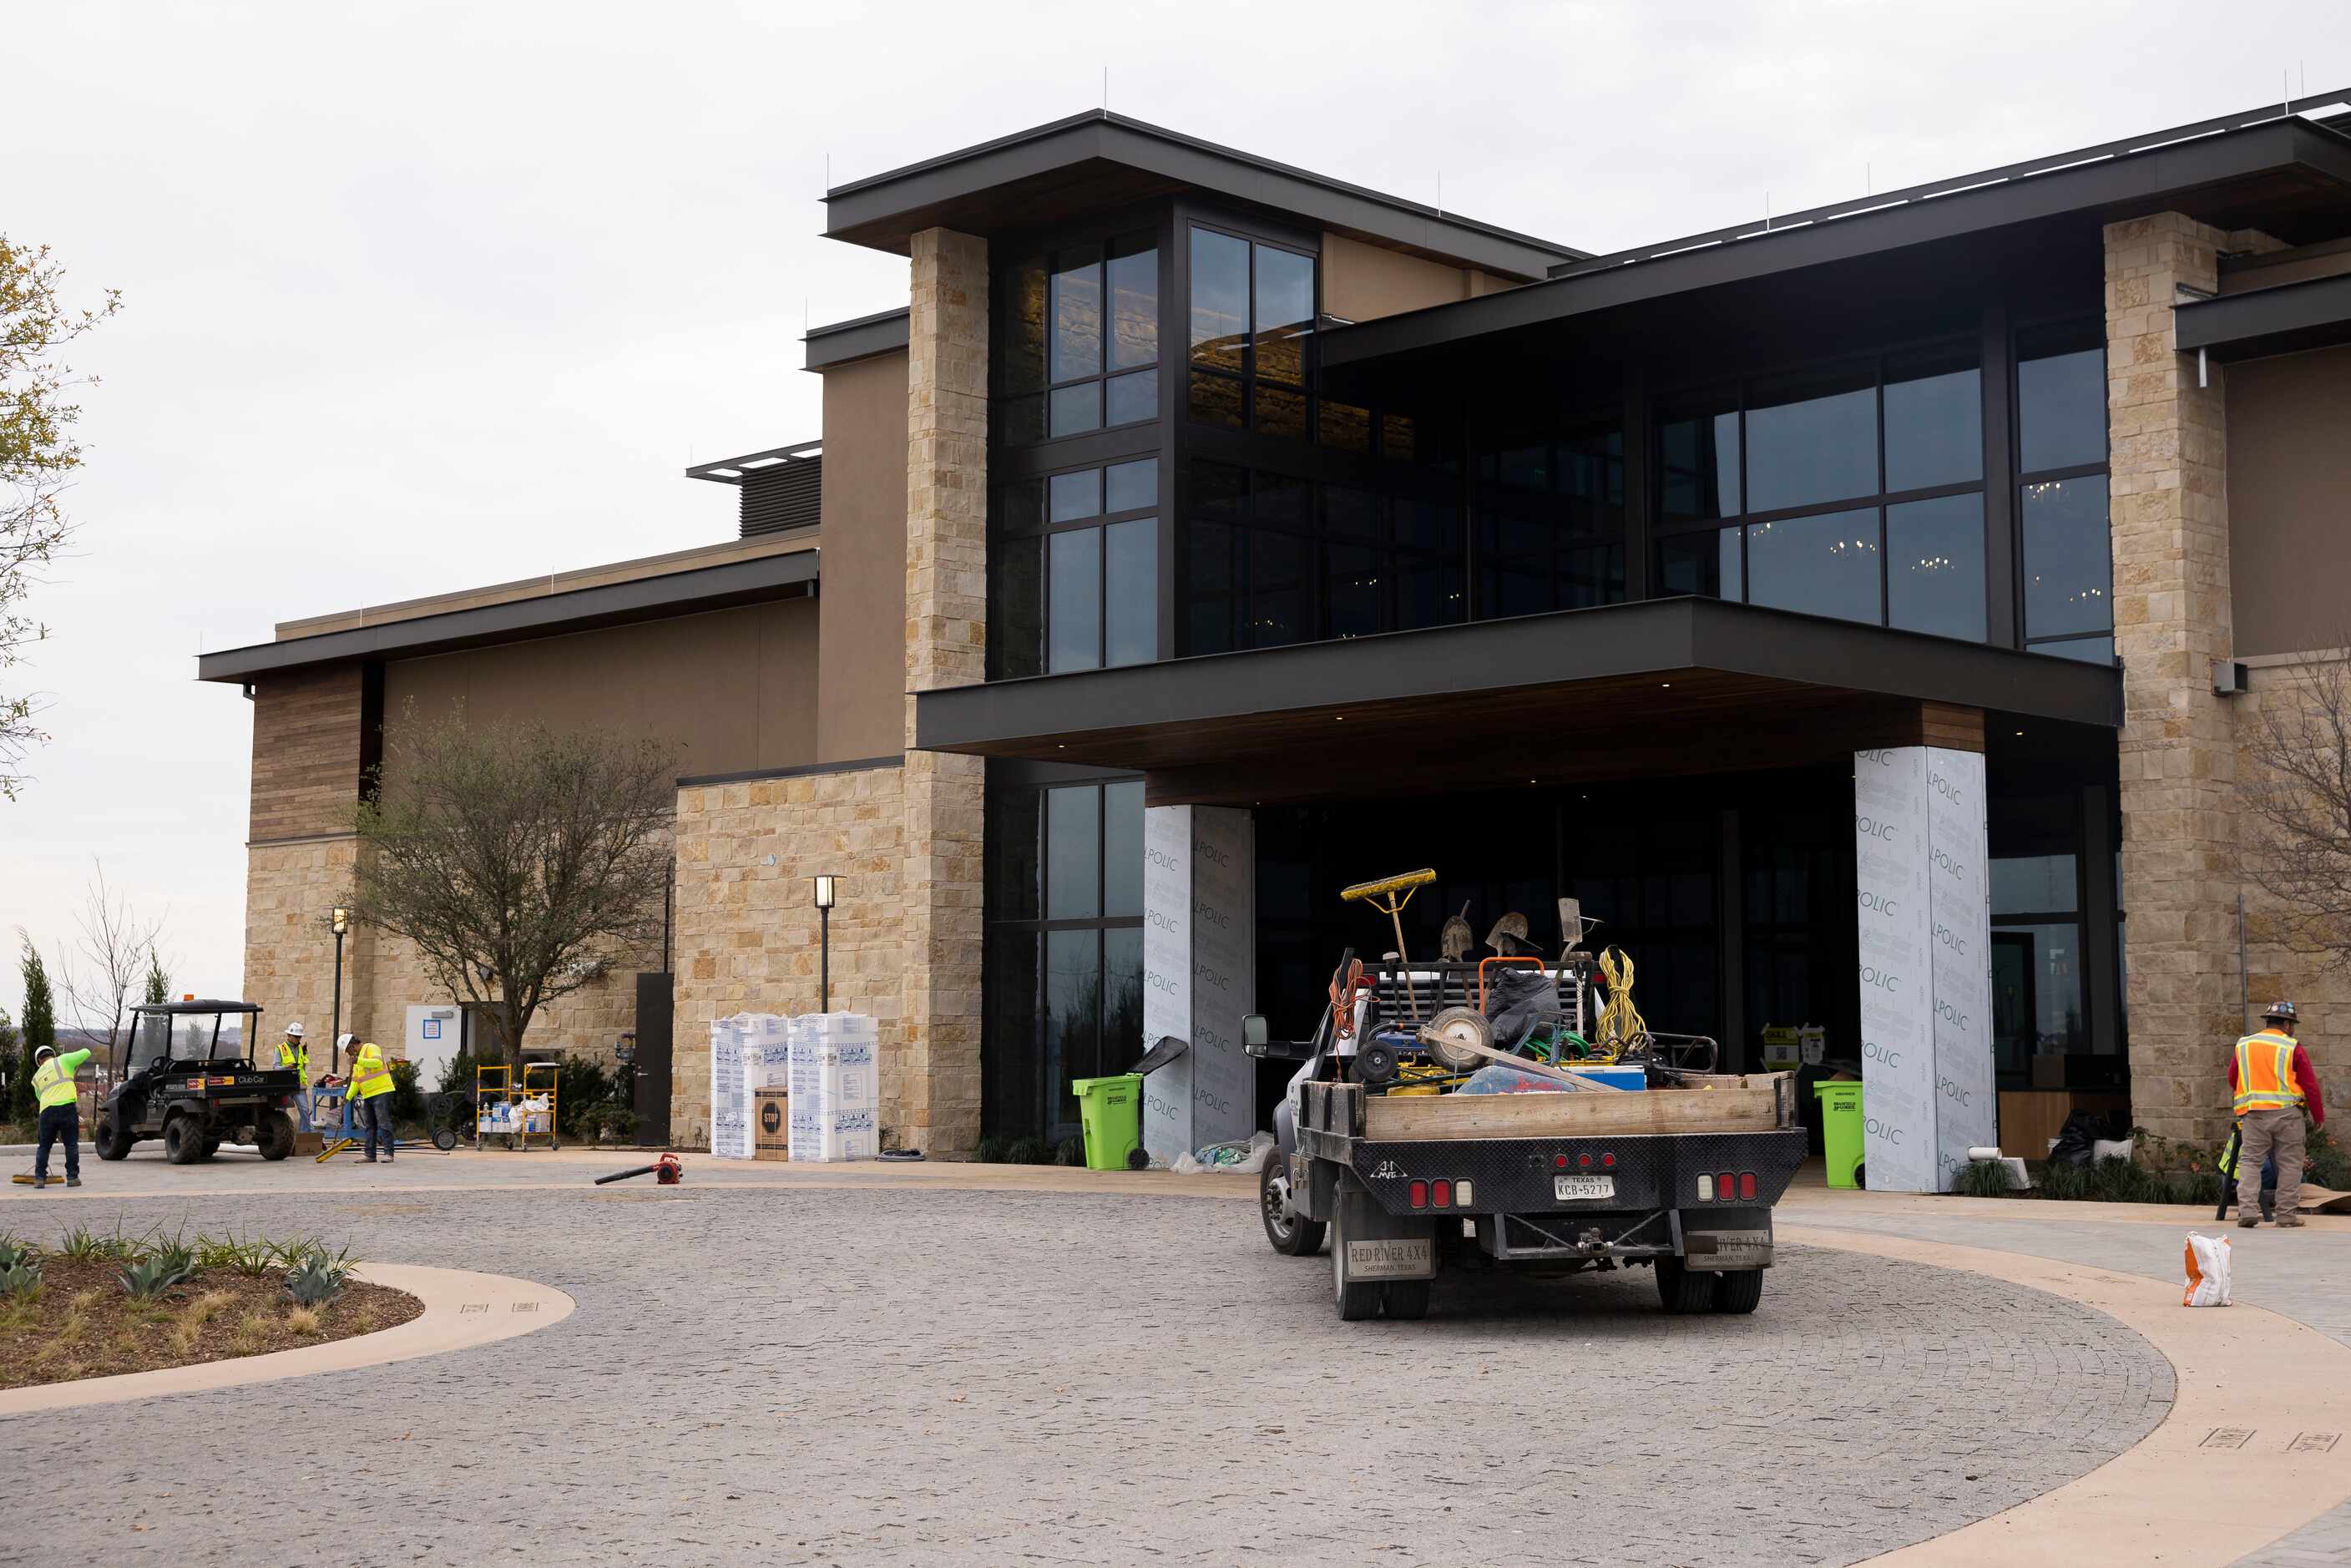 The resort's clubhouse gets finishing touches.